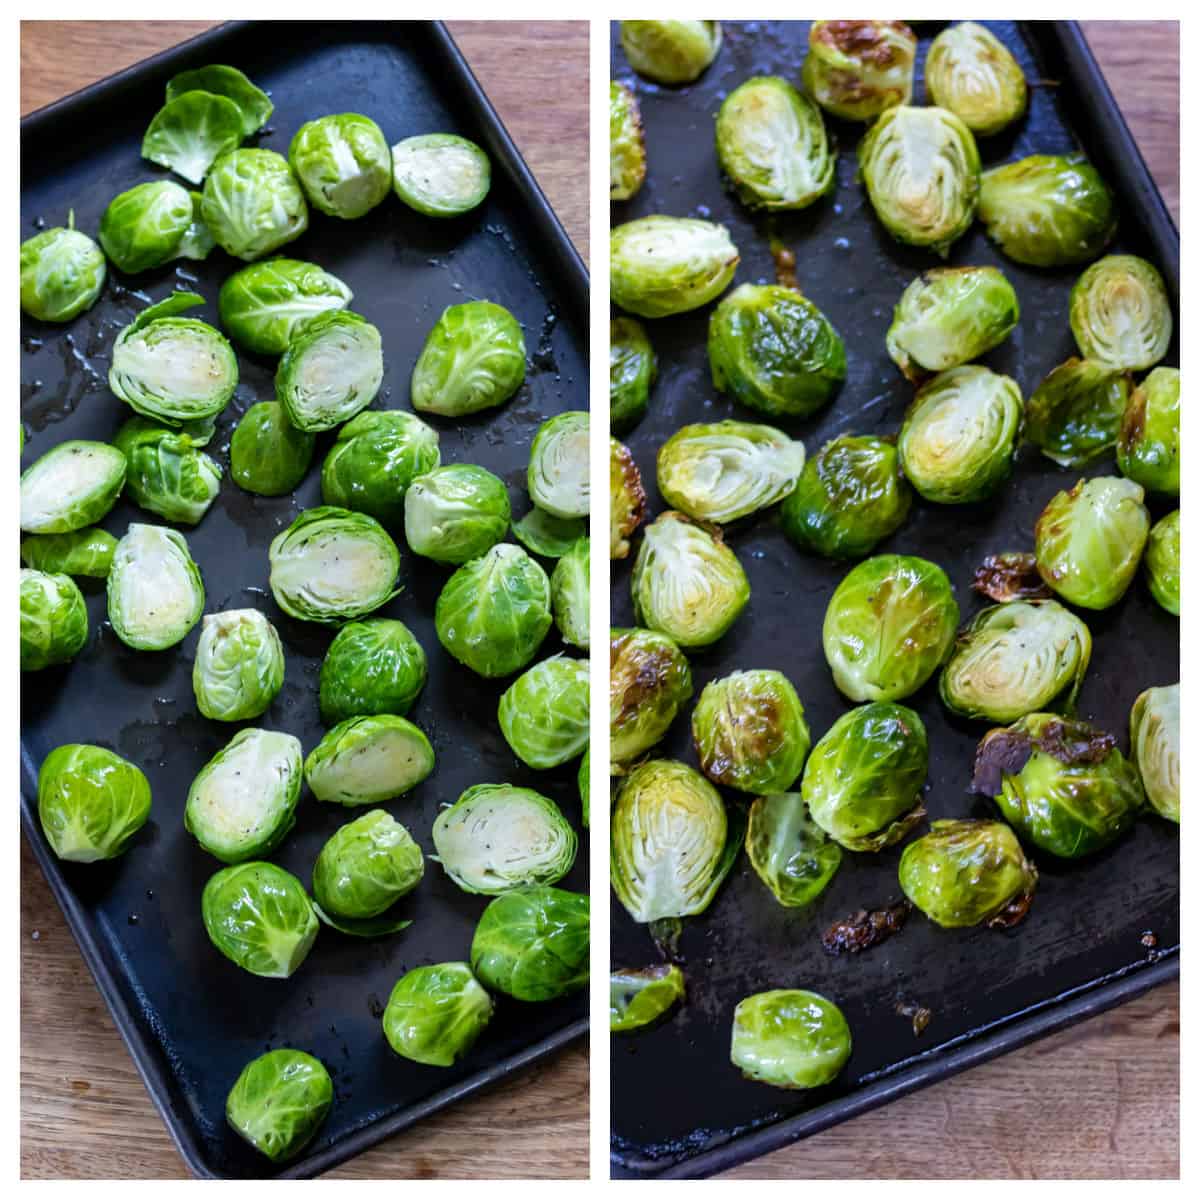 Roasting sprouts on a rimmed baking sheet.